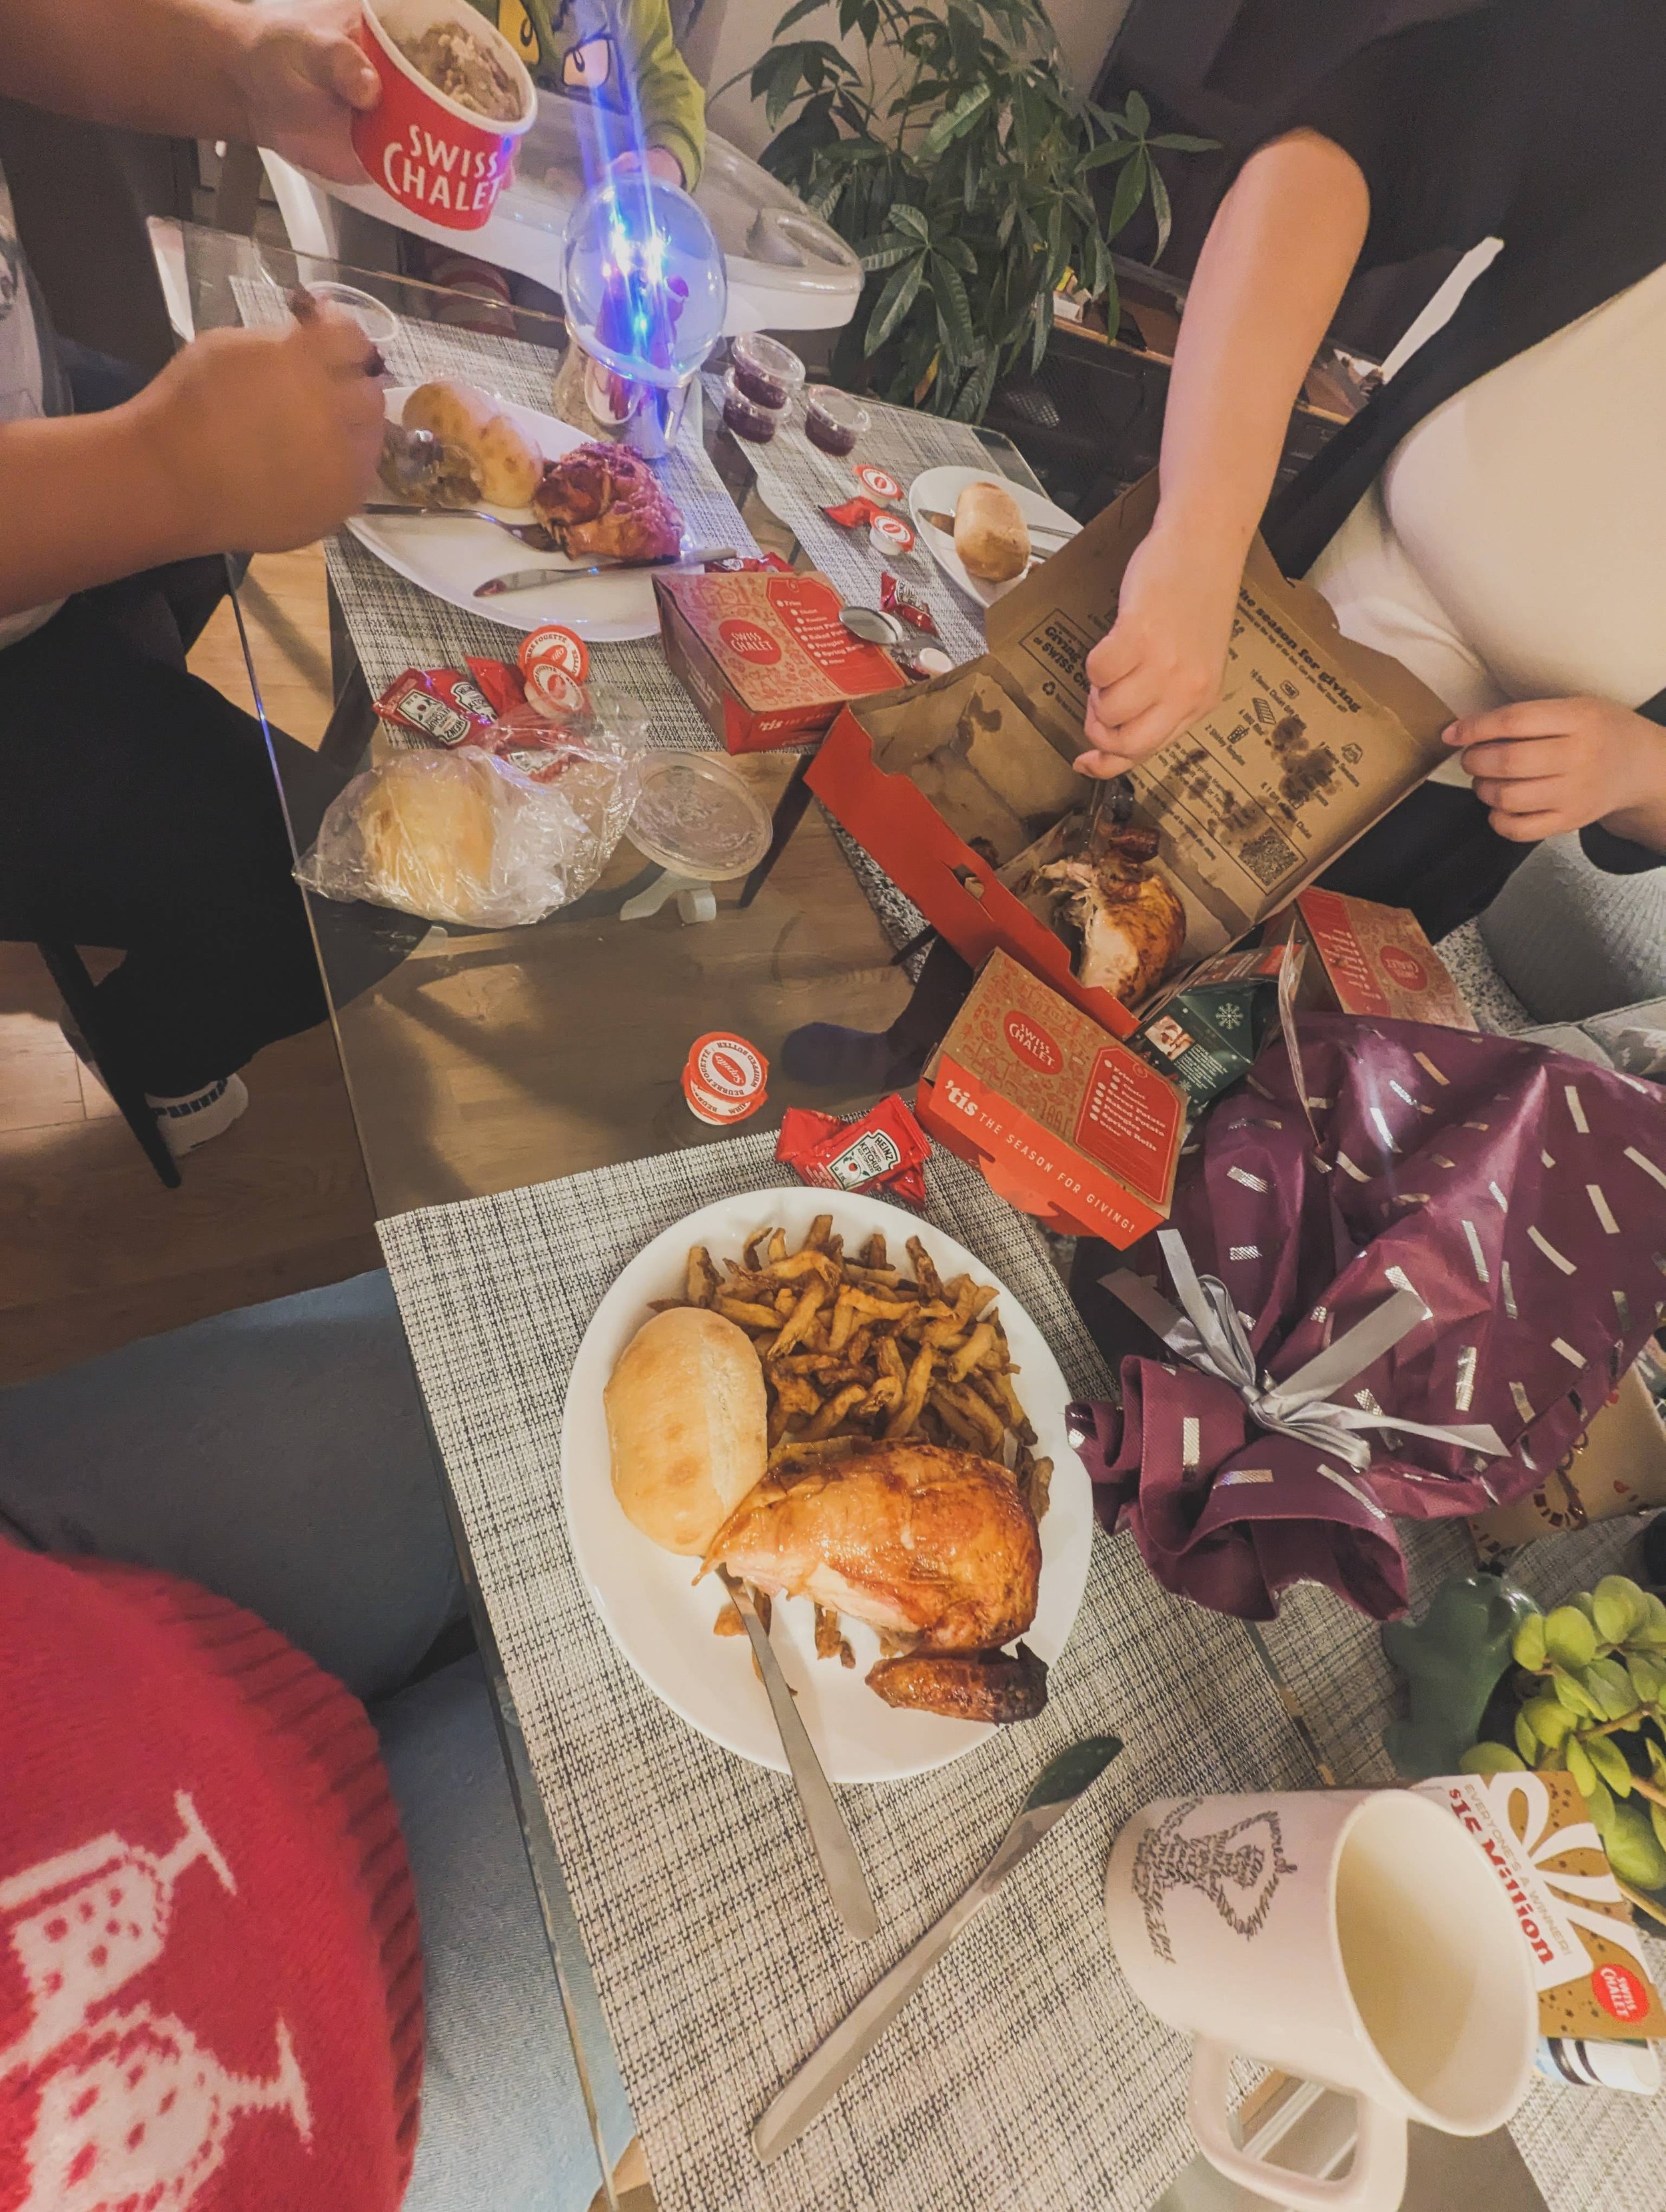  Such a god decision - Swiss Chalet festive platter was just what we all needed! 